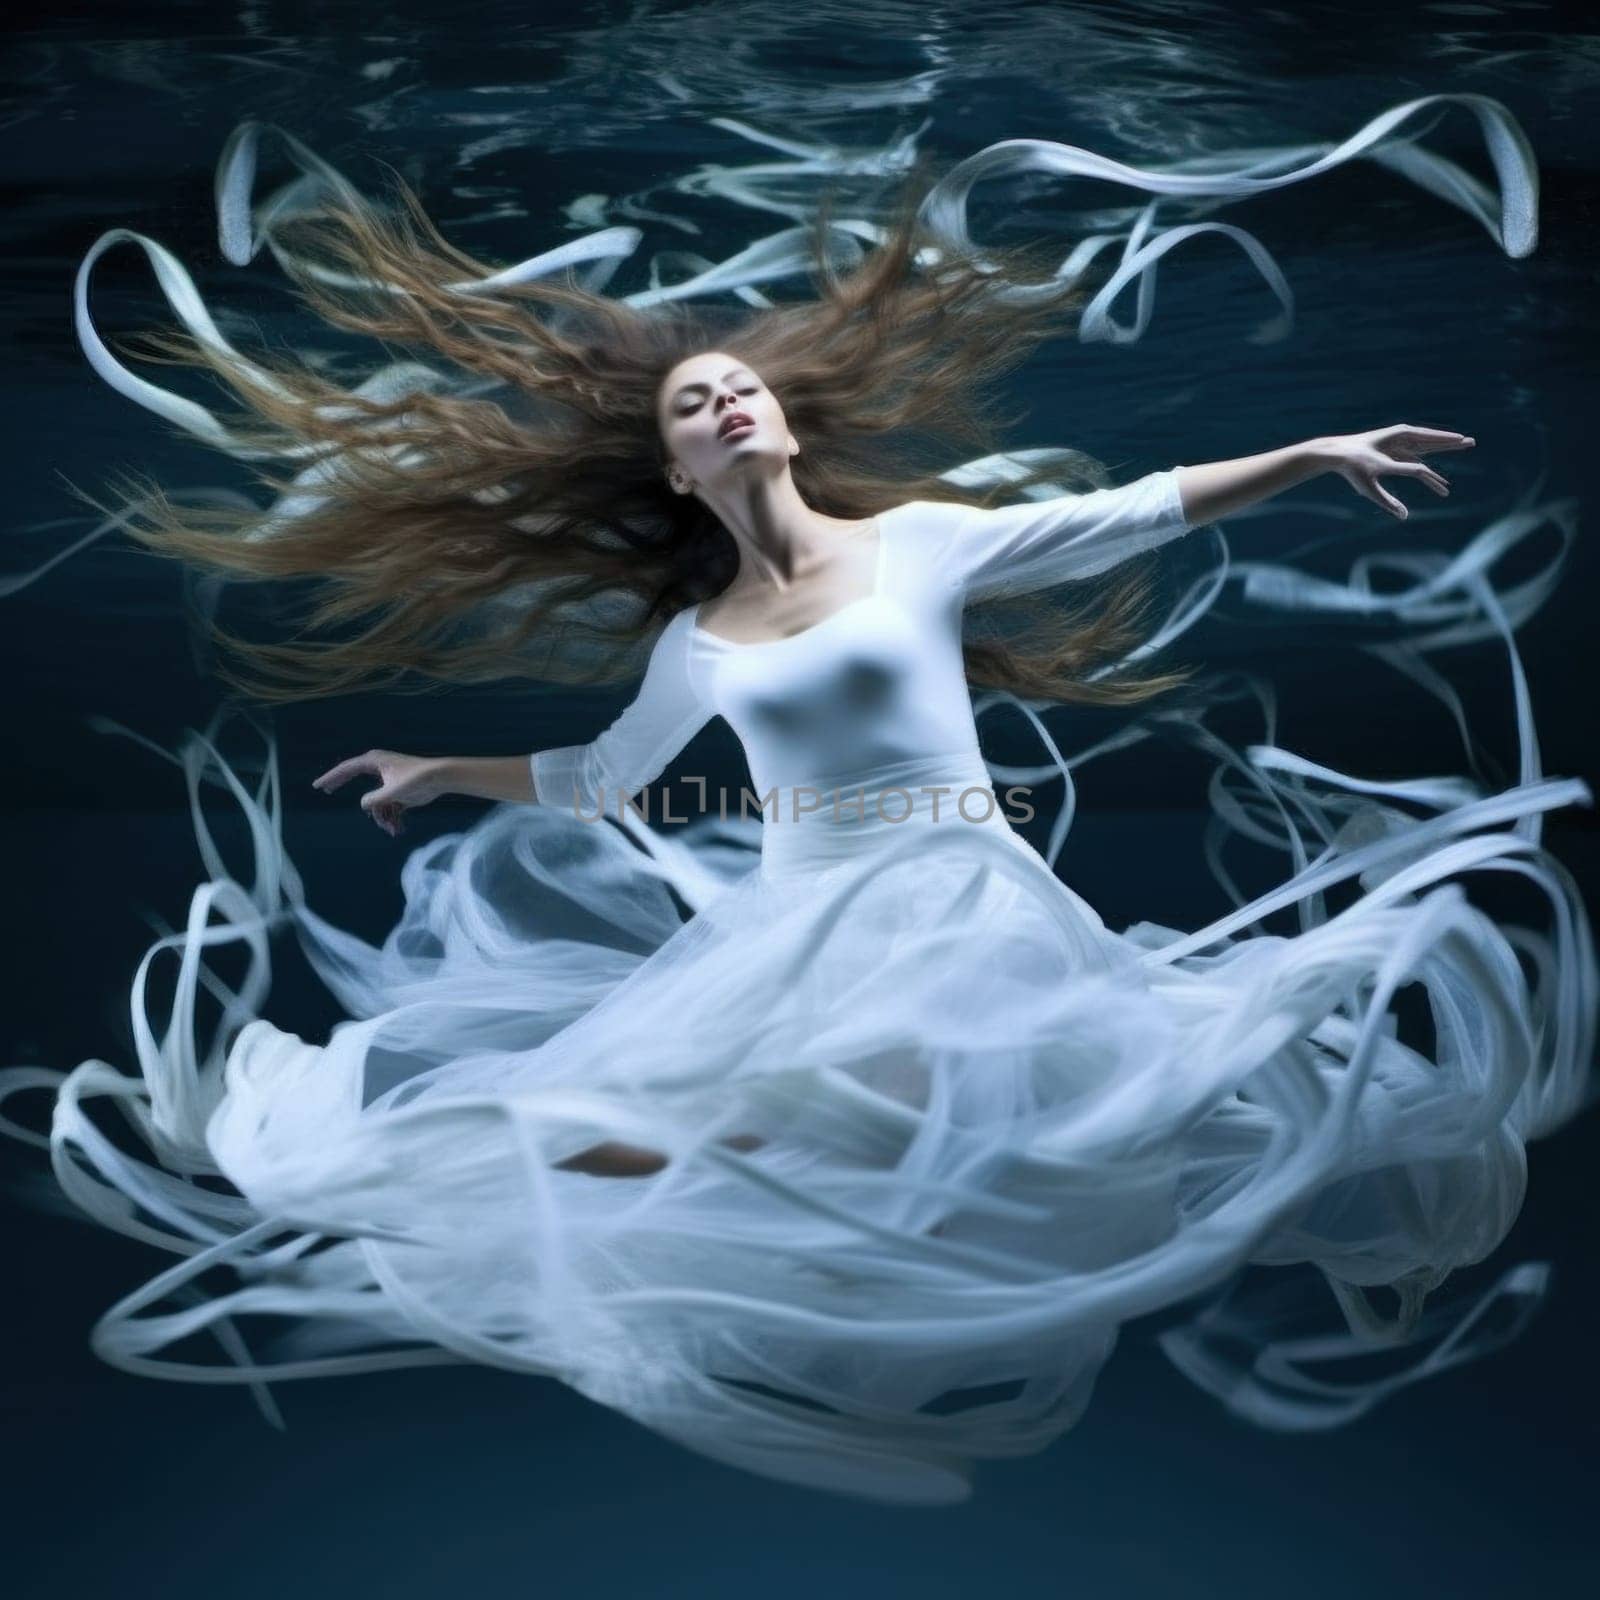 A woman in a white dress is underwater with her hair flowing, AI by starush